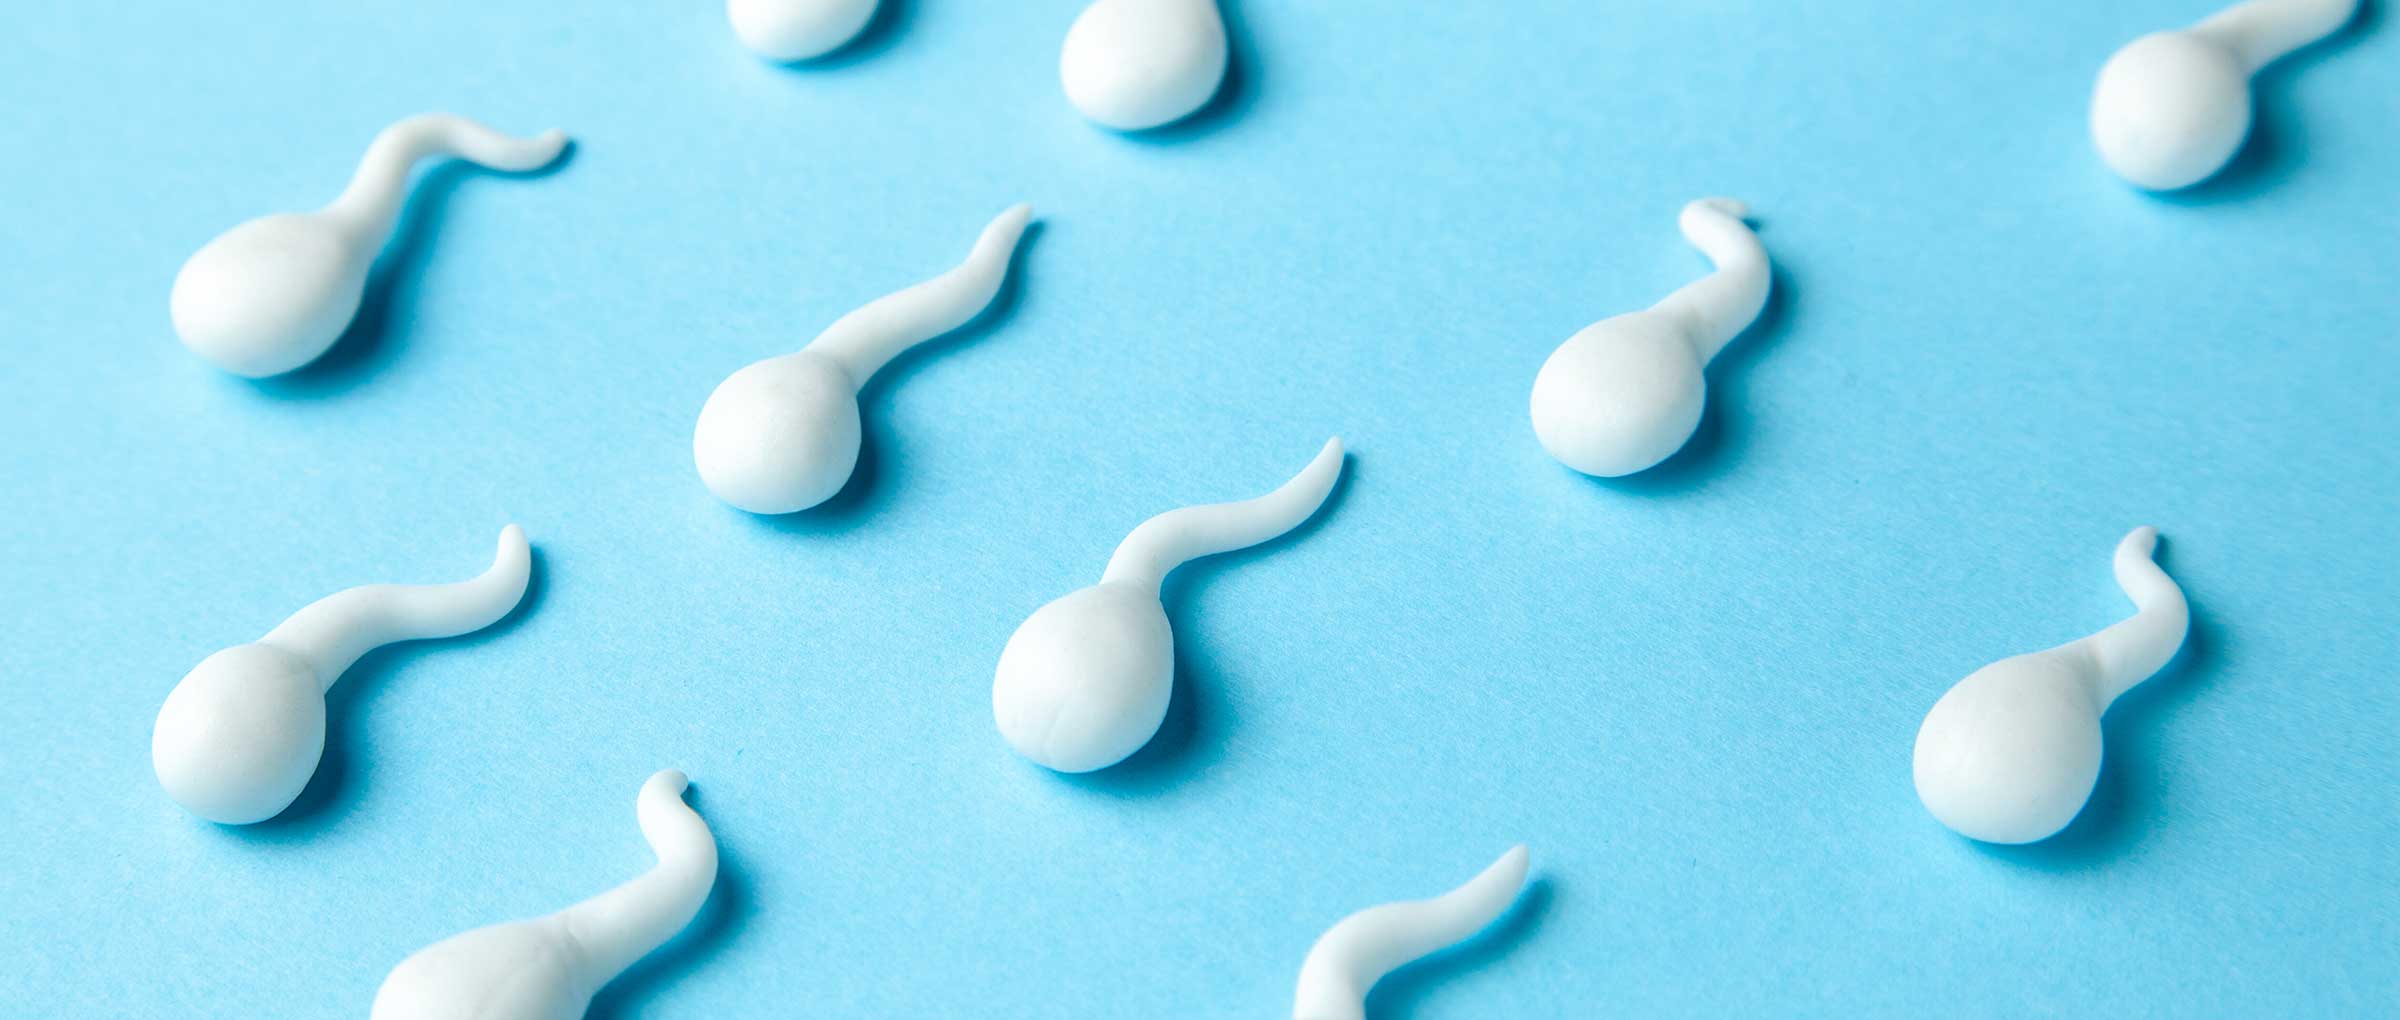 Sperm quality and success after undergoing ART